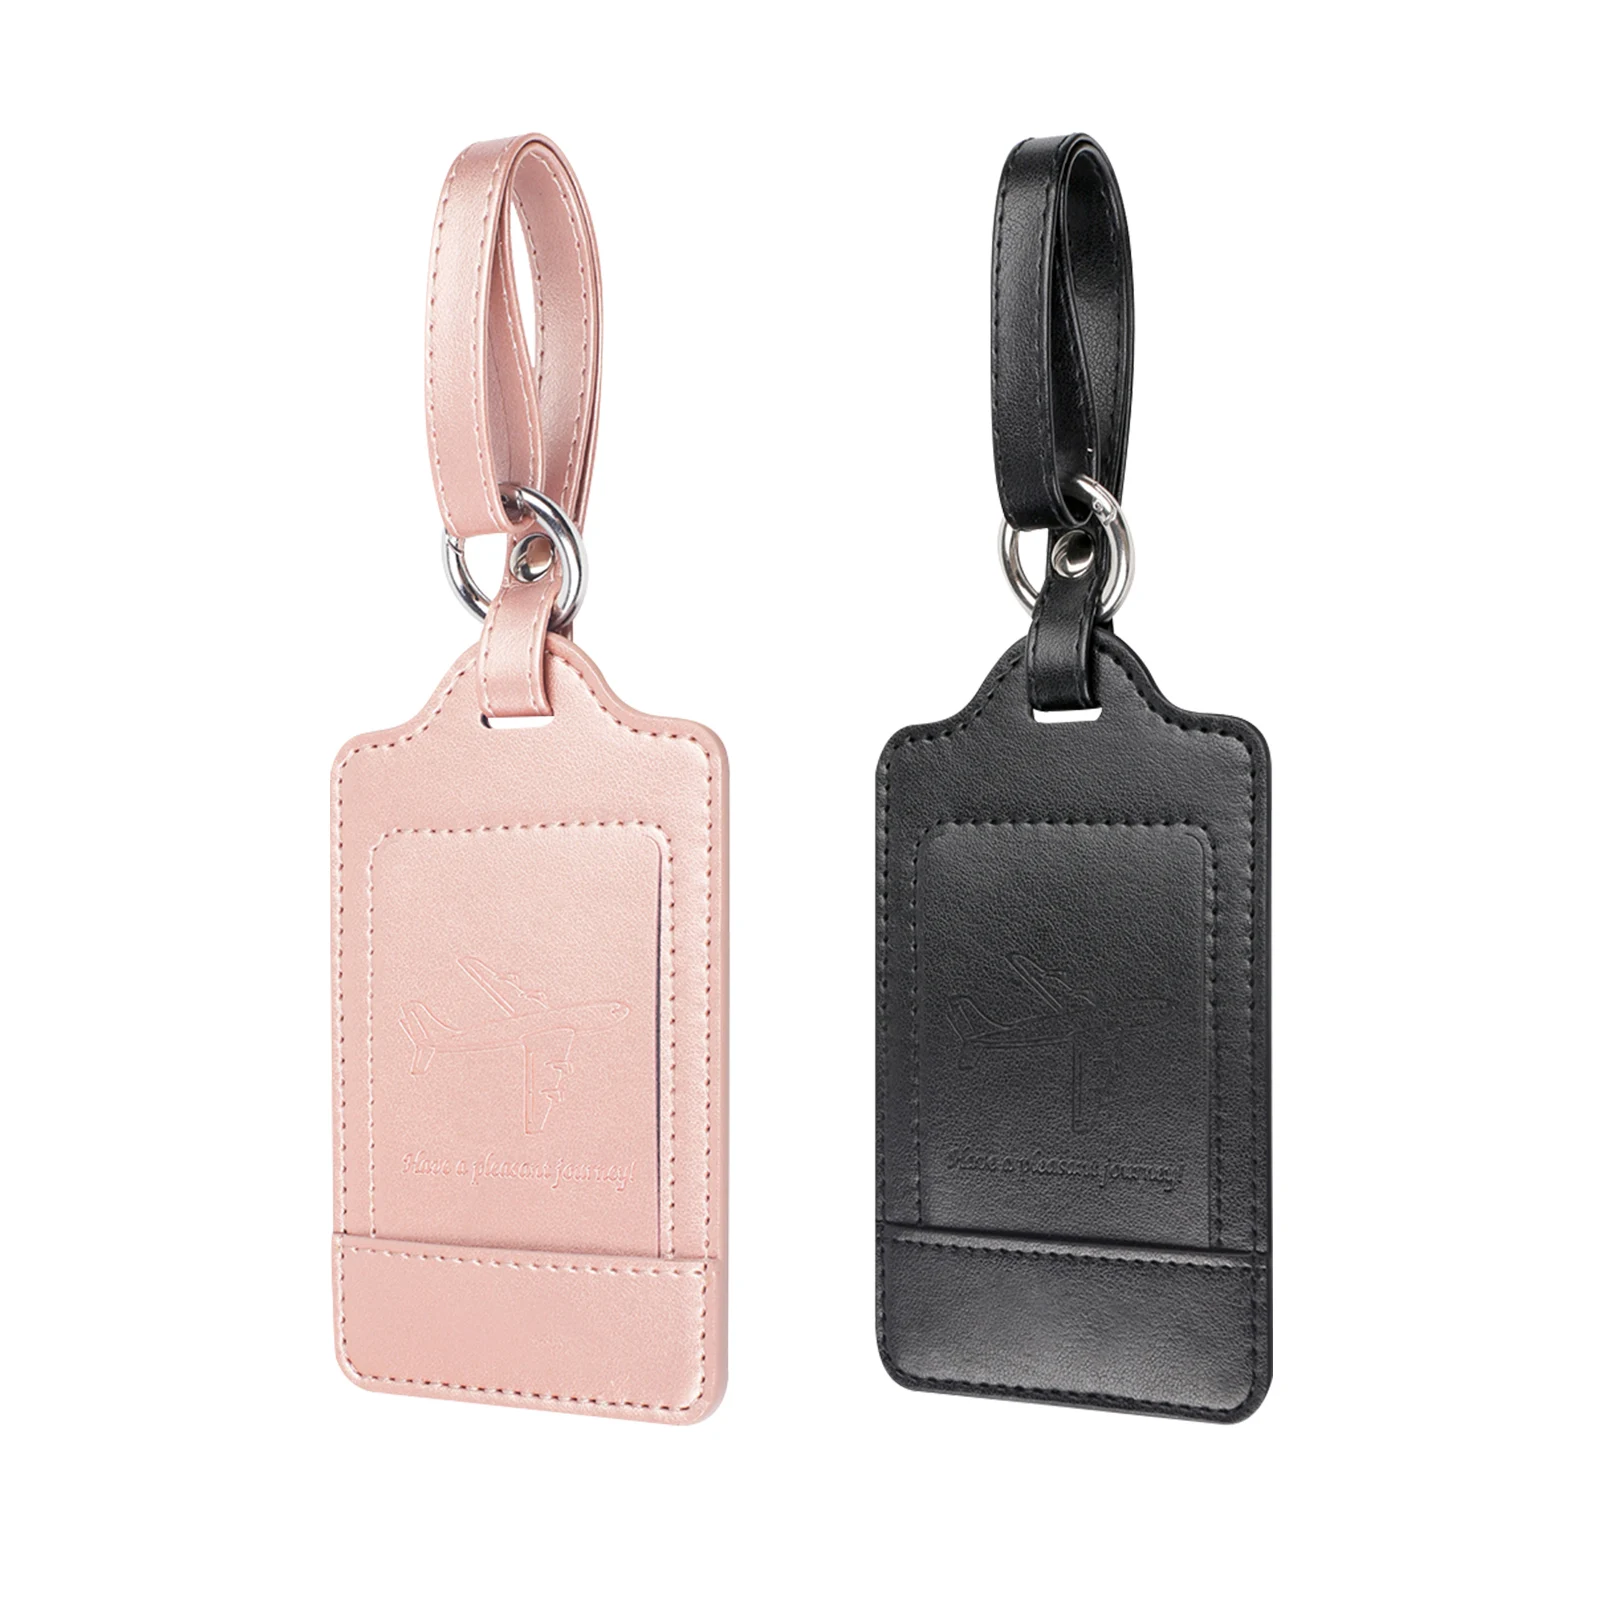 

2pcs Identifier For Suitcases Outdoor Travel Name Plate Anti Lost Luggage Tag PU Leather Business Trip Backpacks With Address